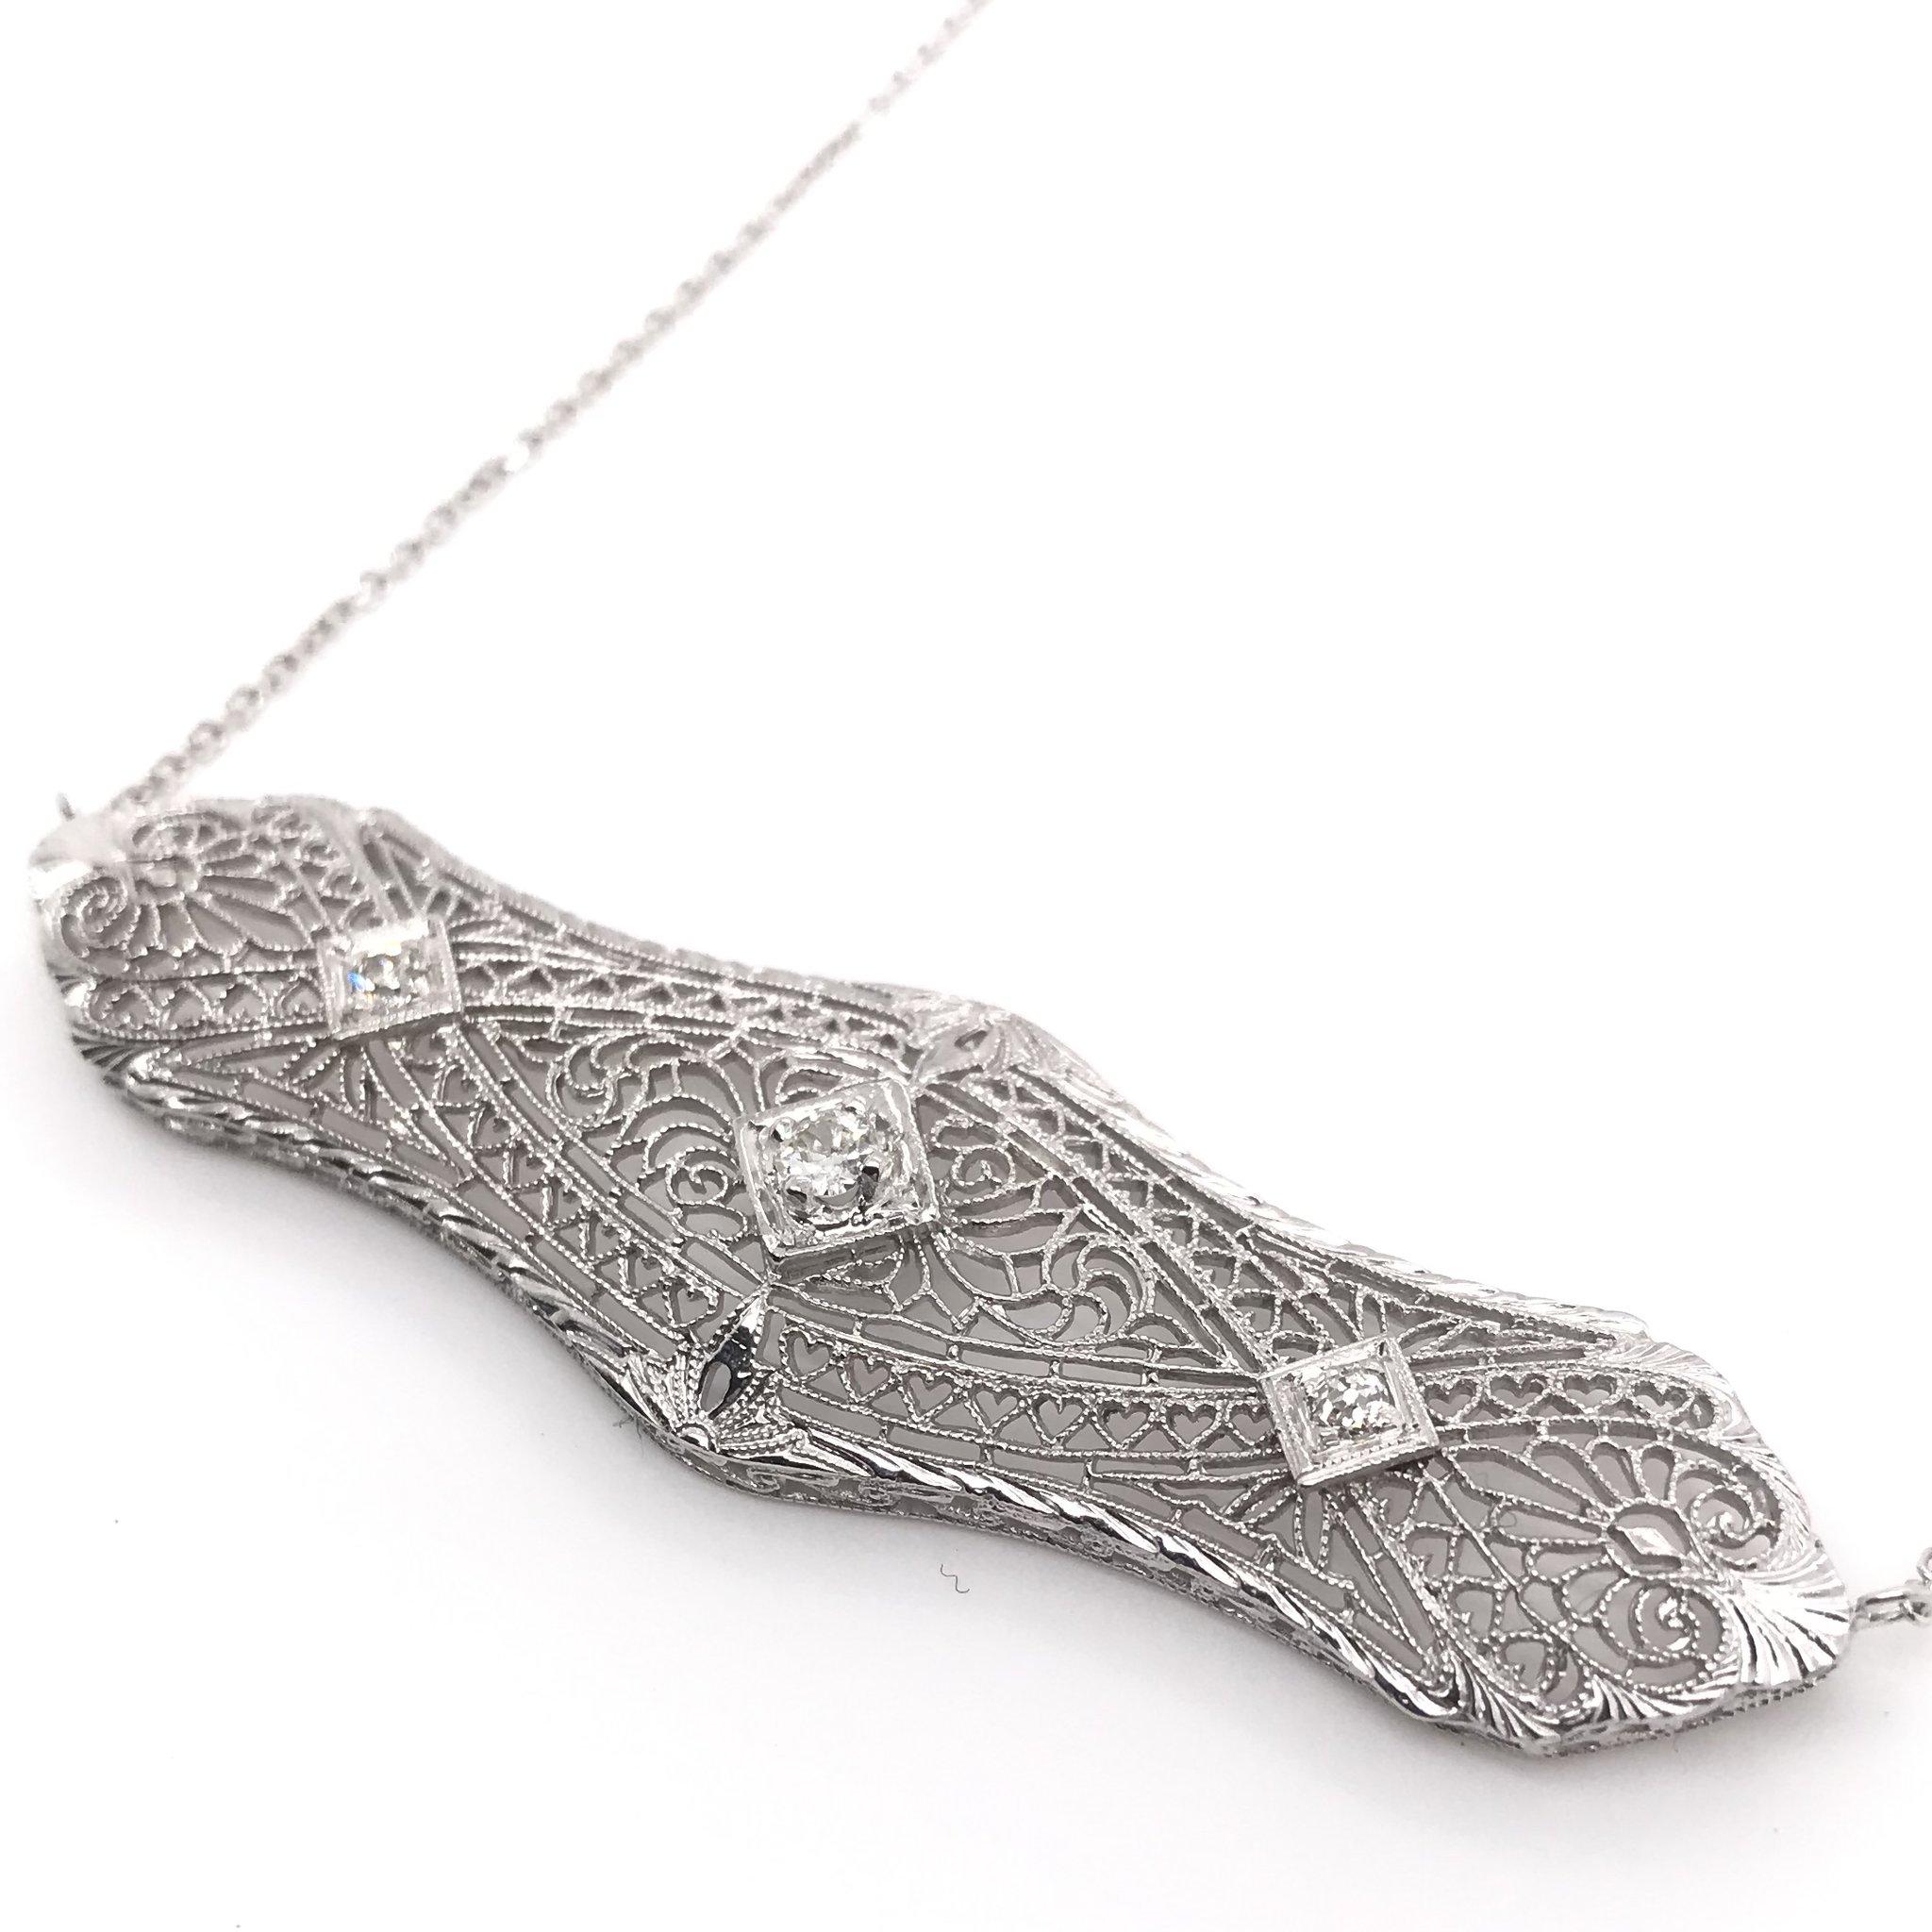 This piece is an antique revision made from reclaimed antique materials. This necklace was originally an antique filigree brooch handcrafted sometime during the Art Deco design period ( 1920-1940 ). The pendant features three sparkling diamond